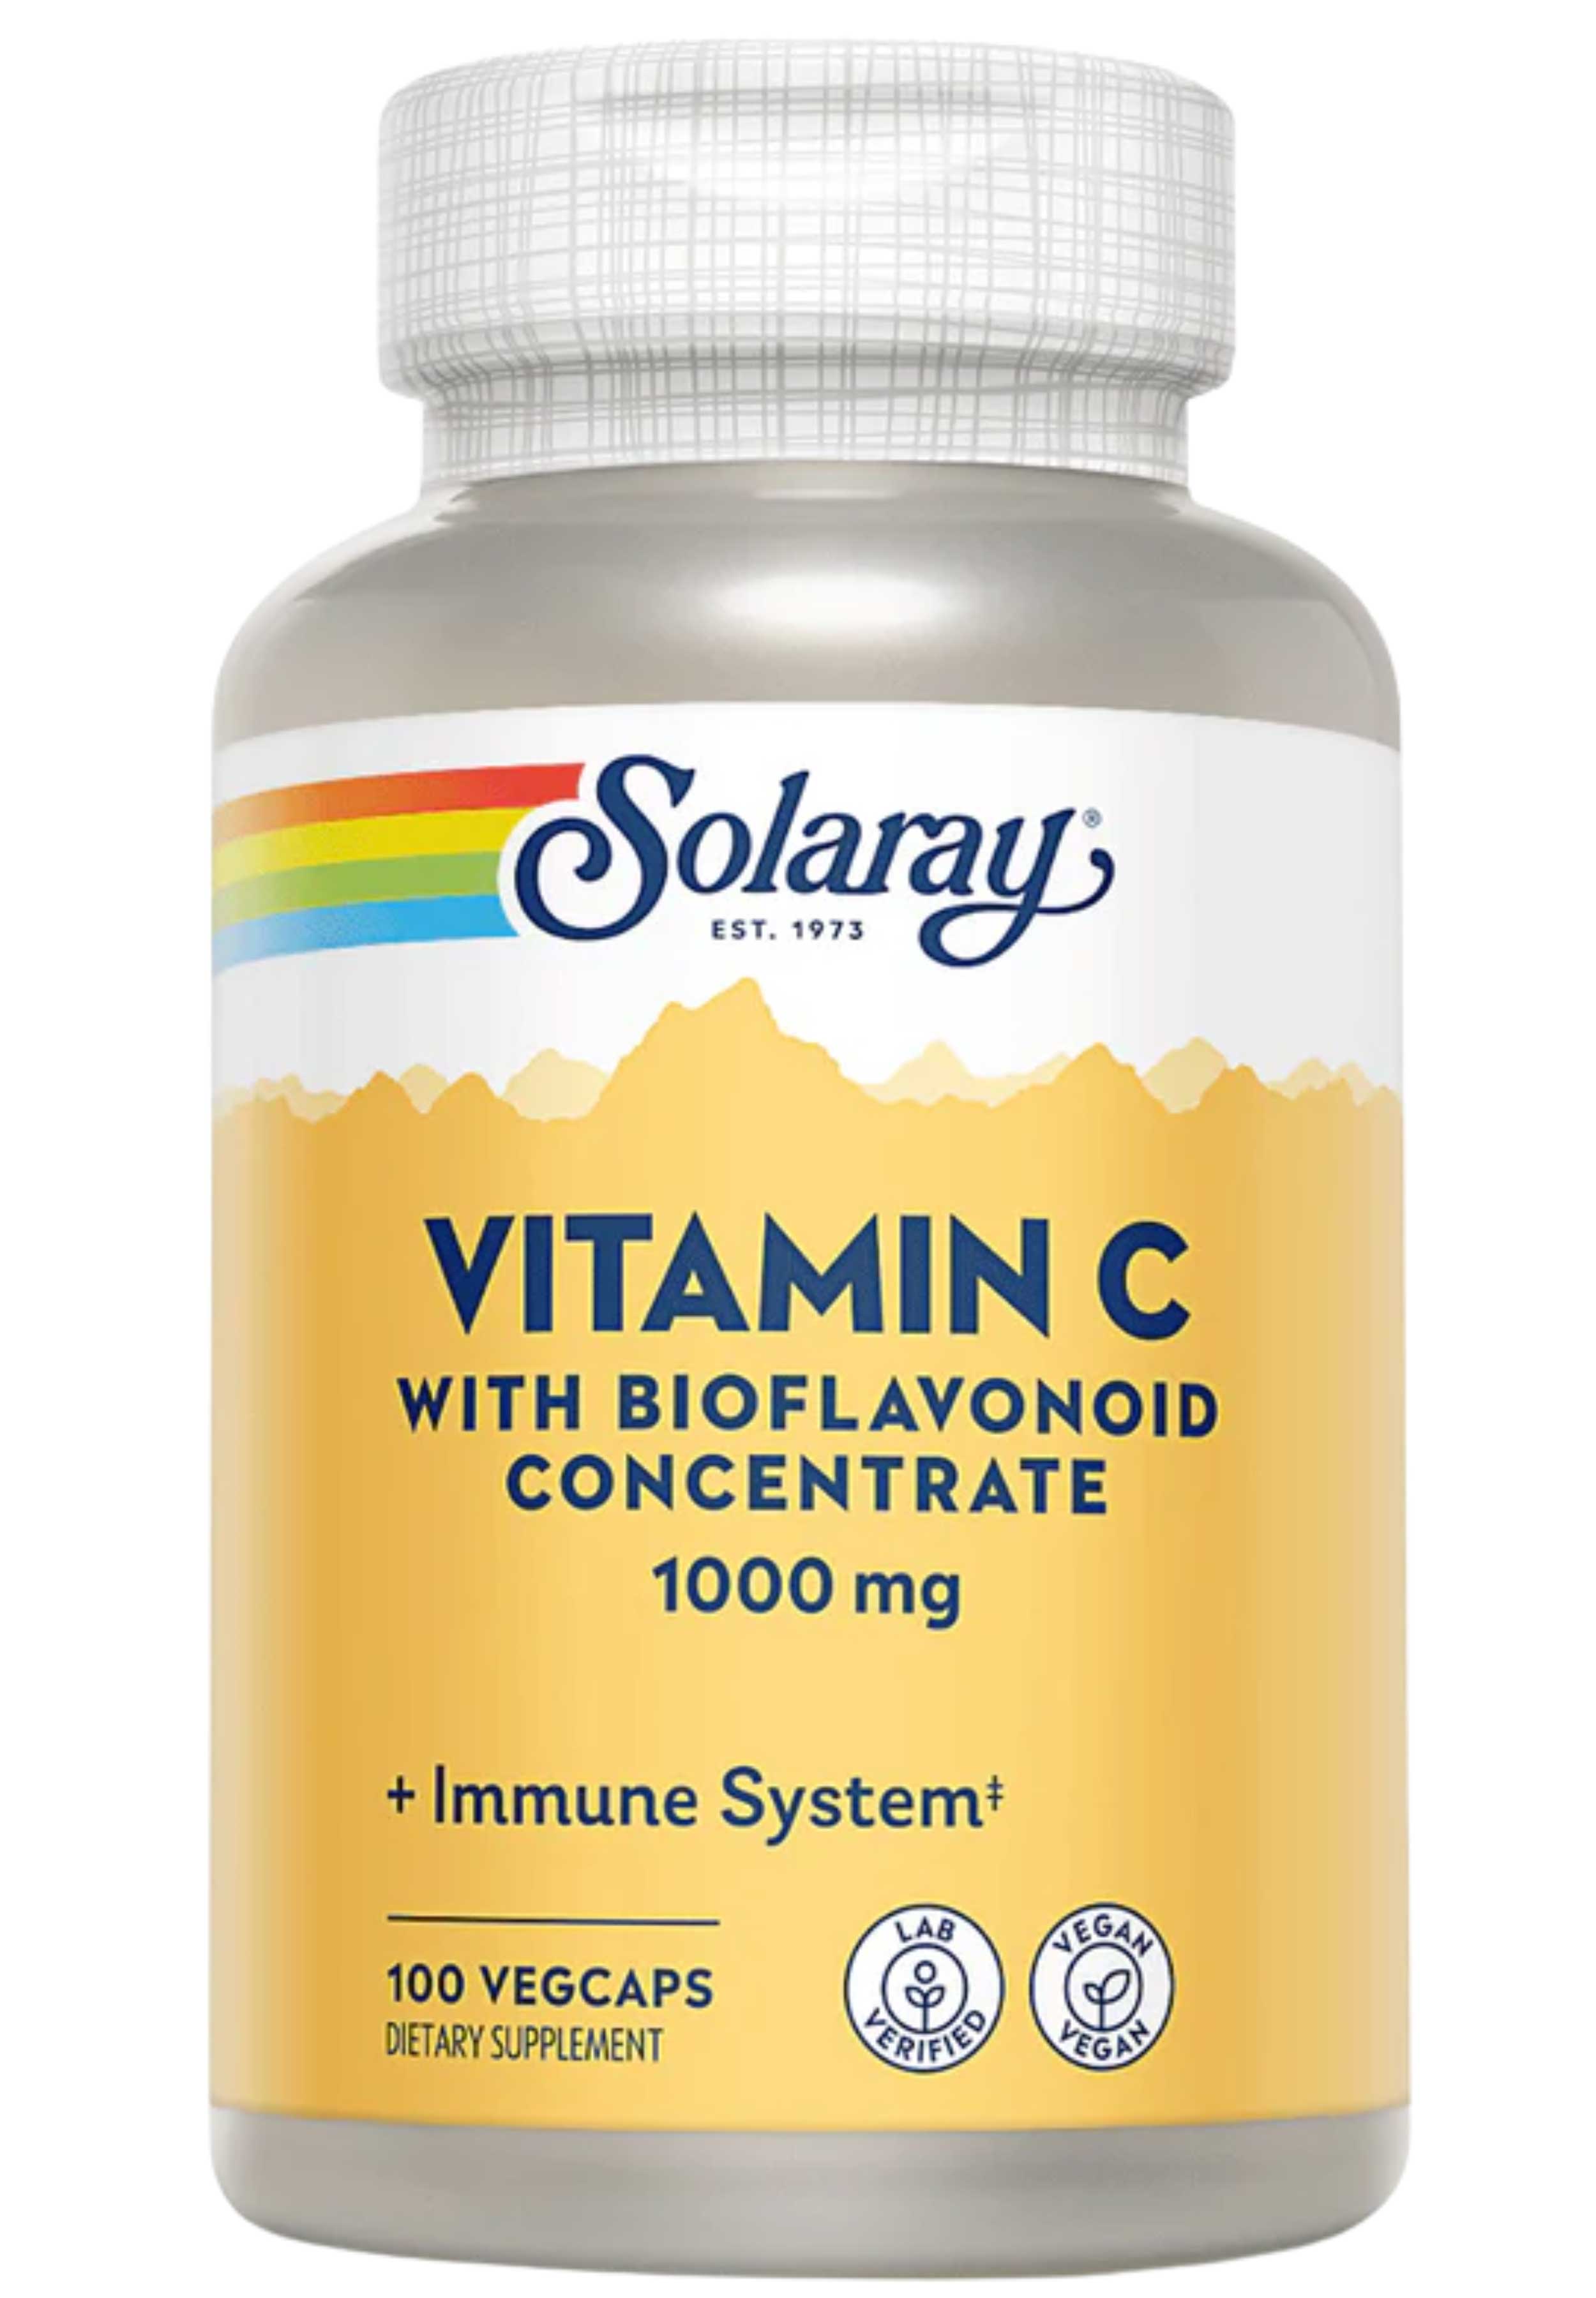 Solaray Vitamin C with Bioflavonoid Concentrate